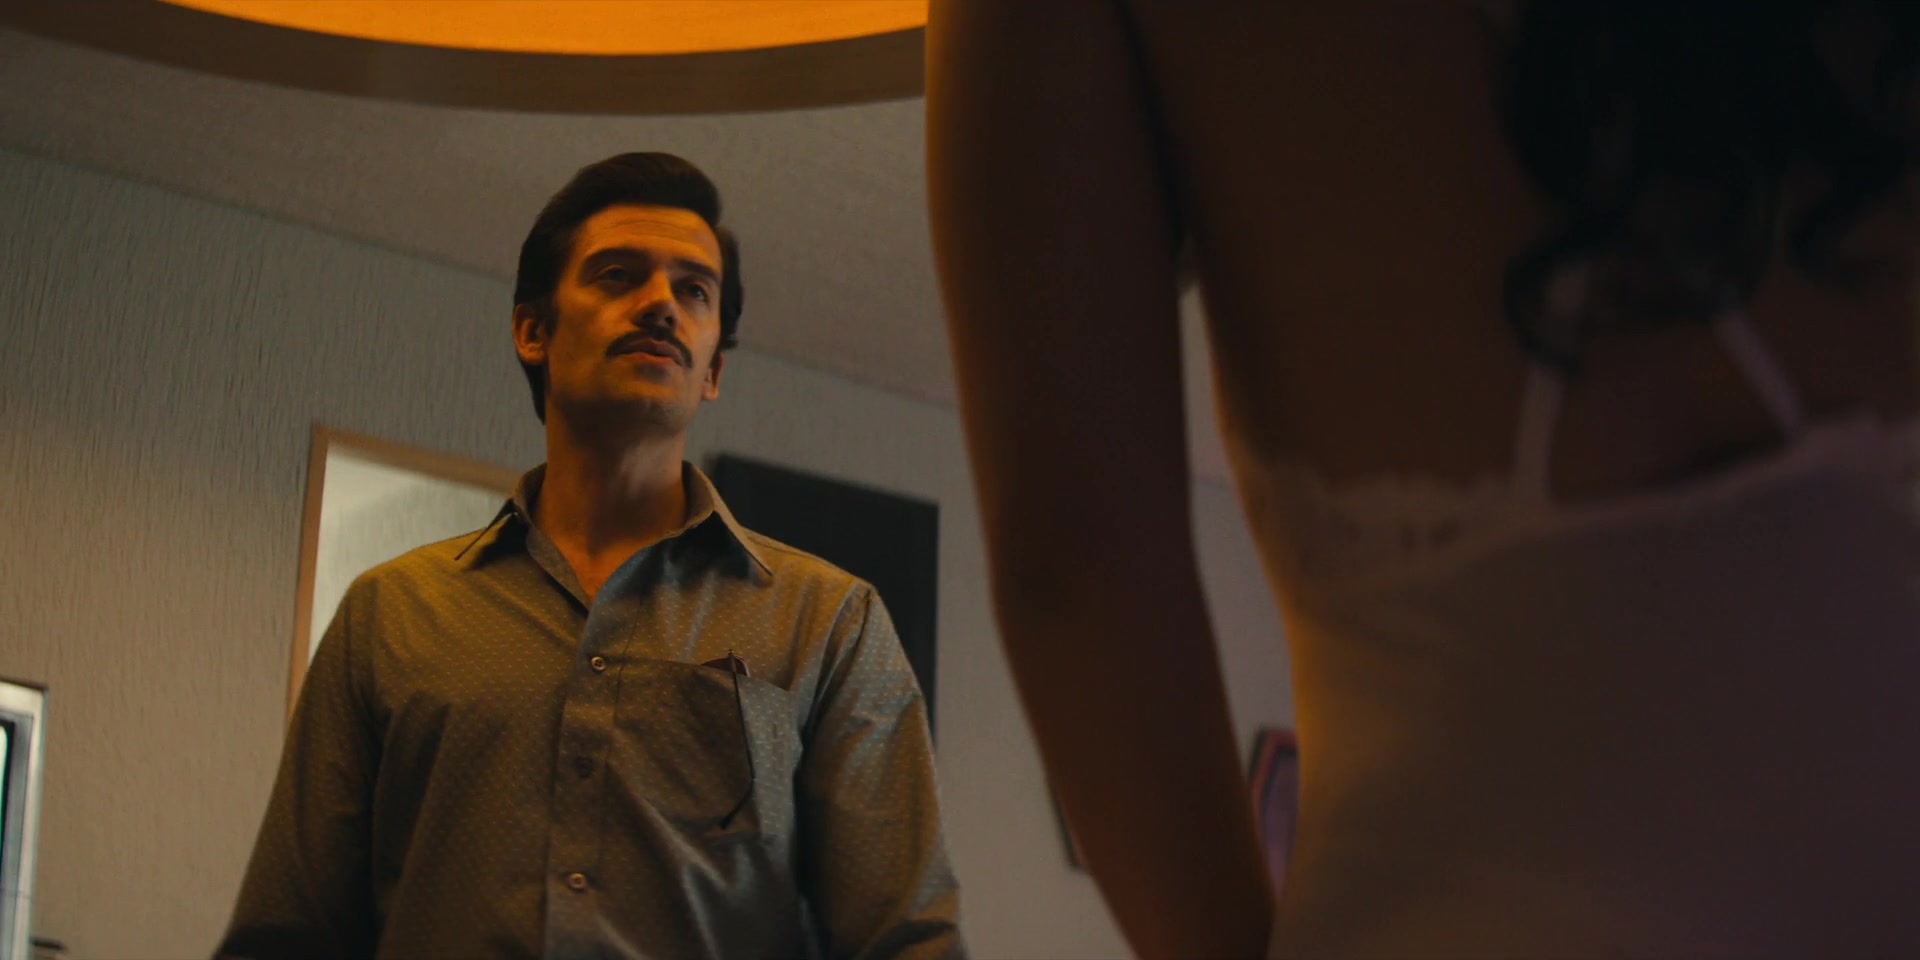 Scene narcos sex Free Narcos